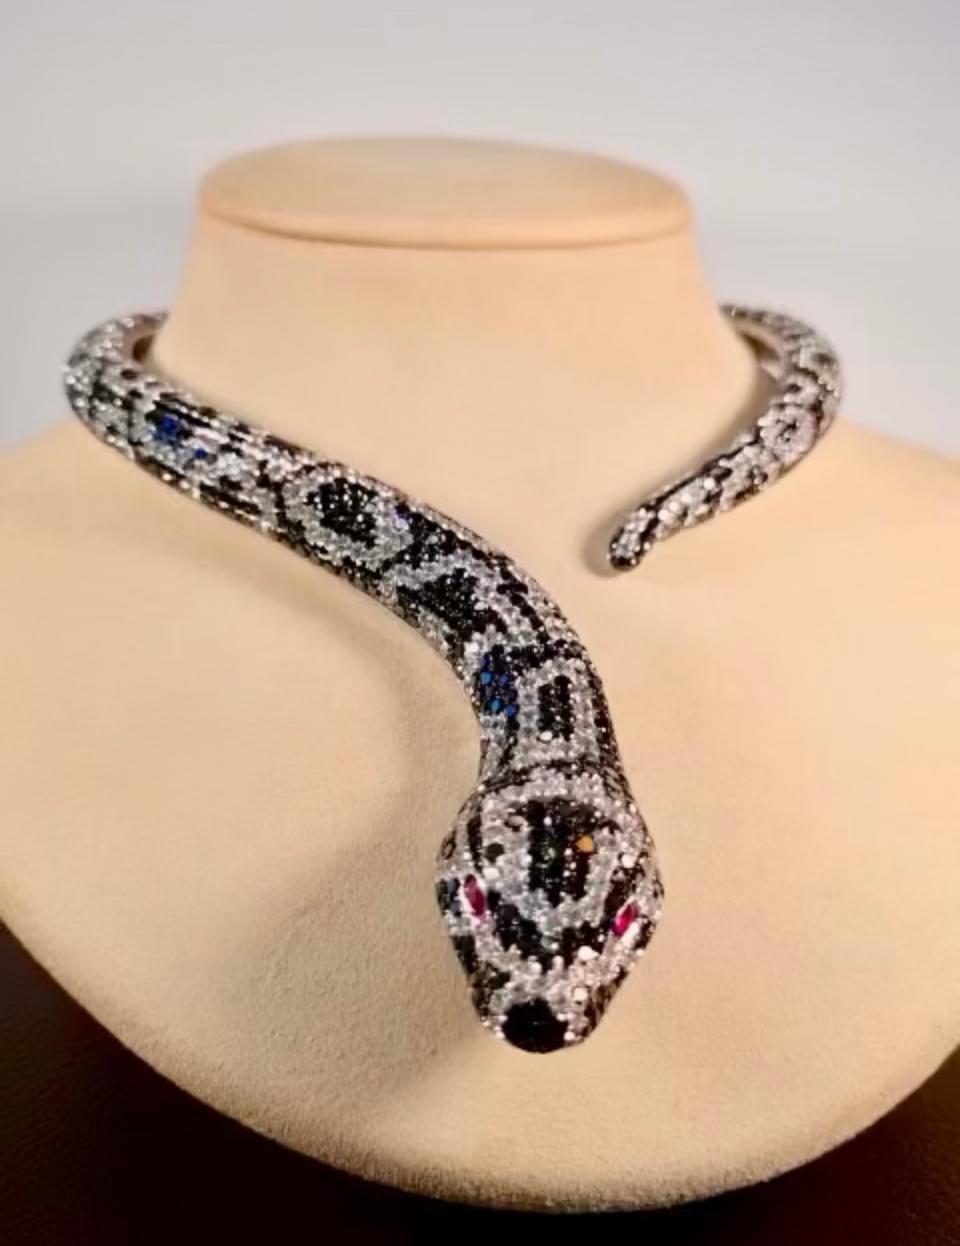 A must in a womans jewelry wardrobe a  Serpent or Serpenti 
Coiled around a history of humanity, the seductive serpent dates back to ancient Greek and Roman mythology. 
A motif representing wisdom, vitality, and the circle of life, the snake has